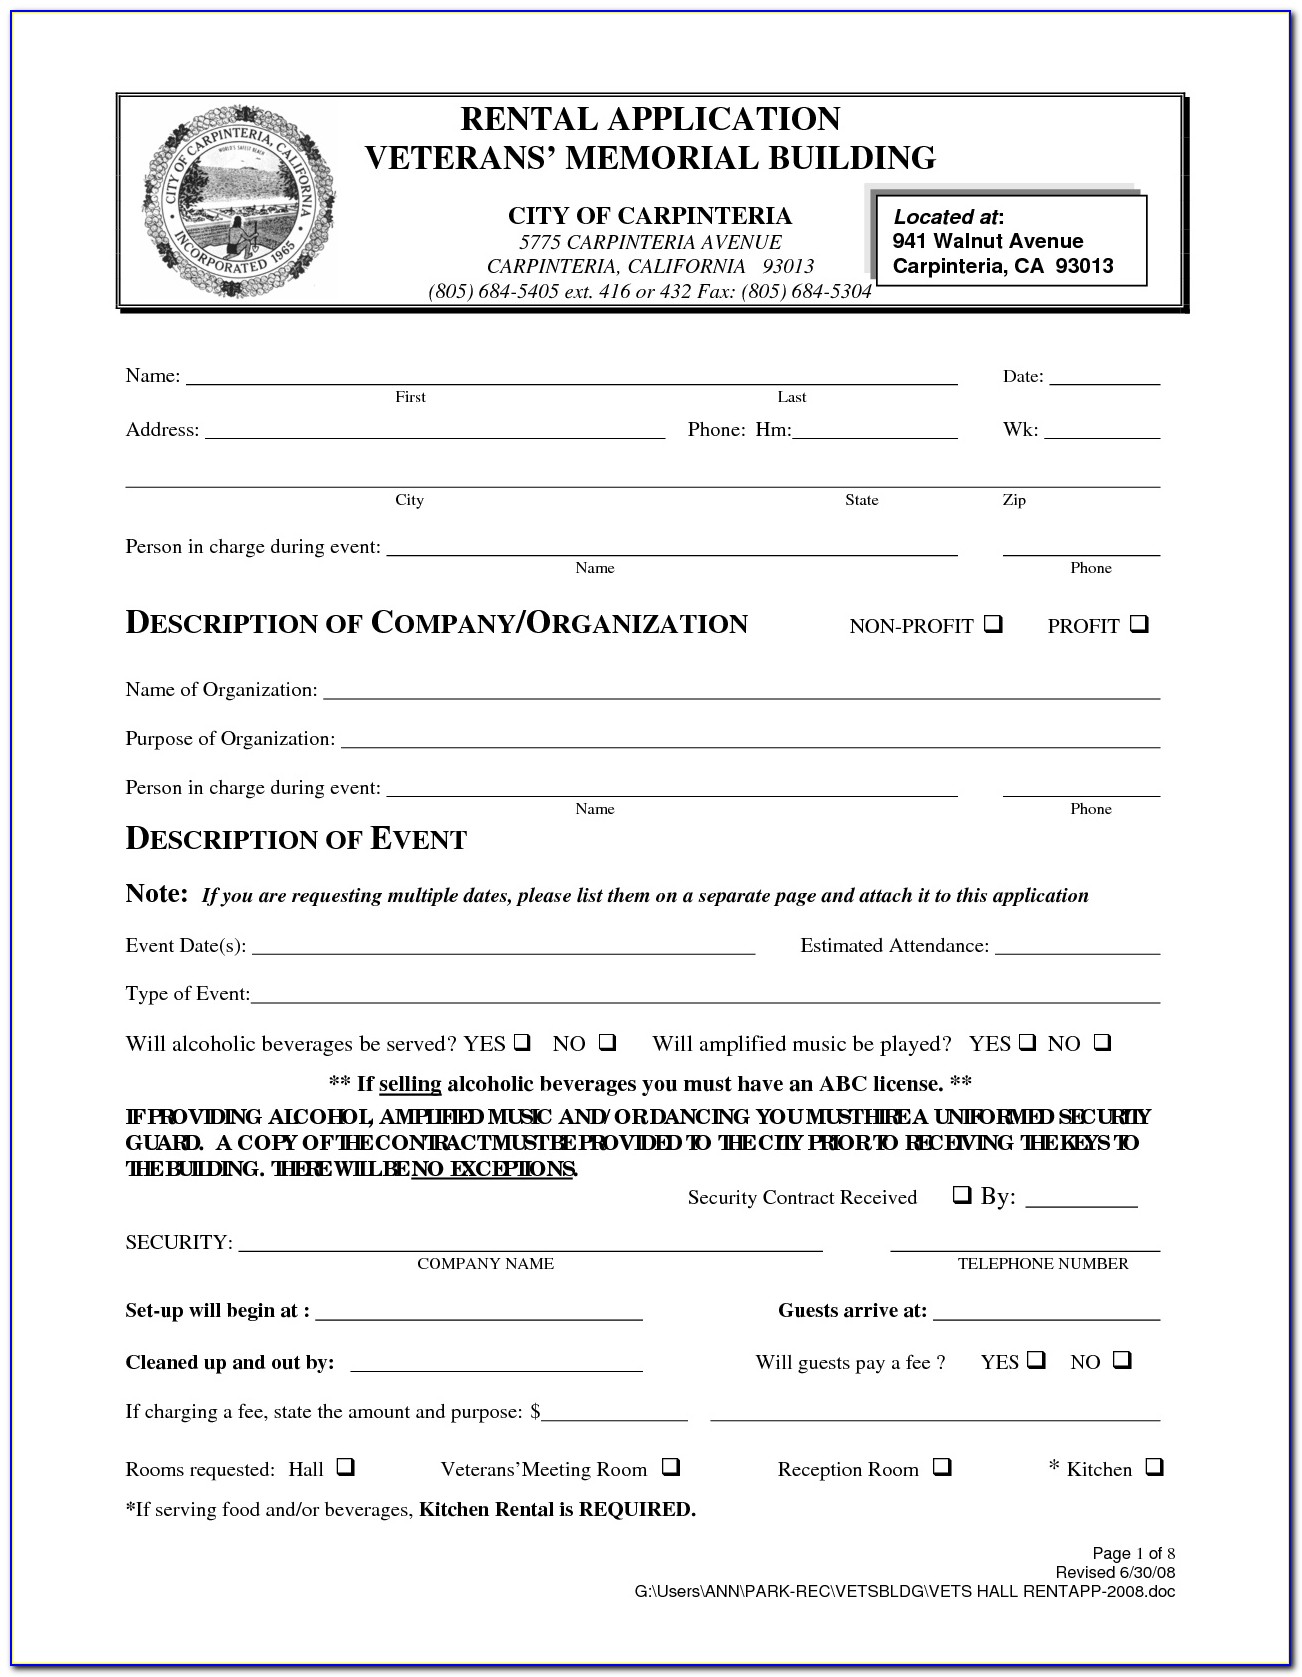 California Association Of Realtors Residential Lease Agreement Form